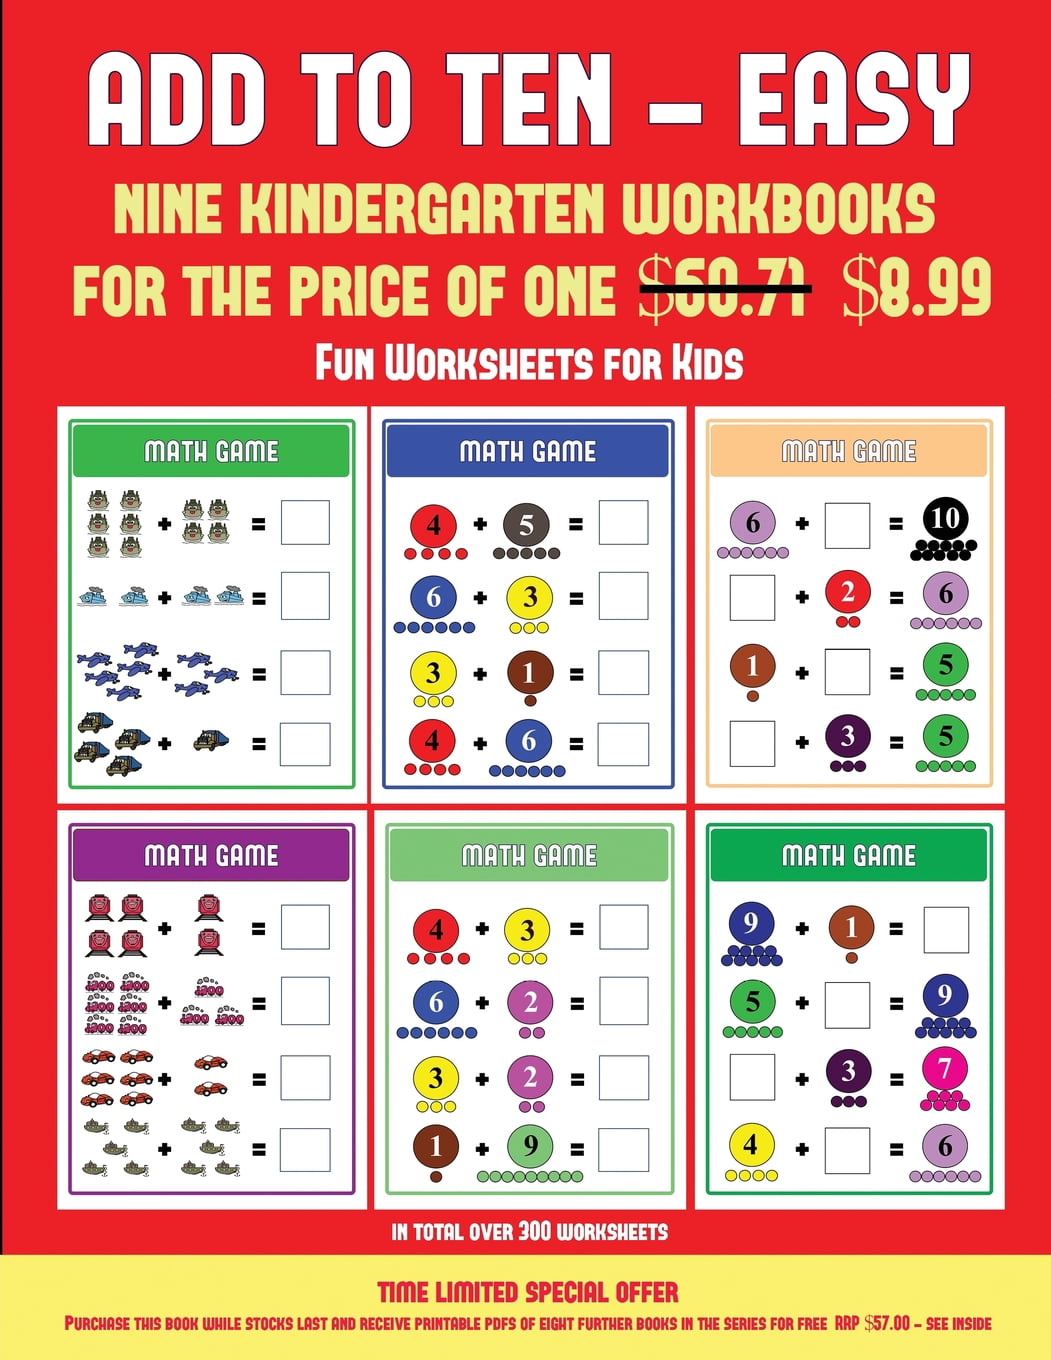 Fun Worksheets for Kids: Fun Worksheets for Kids (Add to Ten - Easy